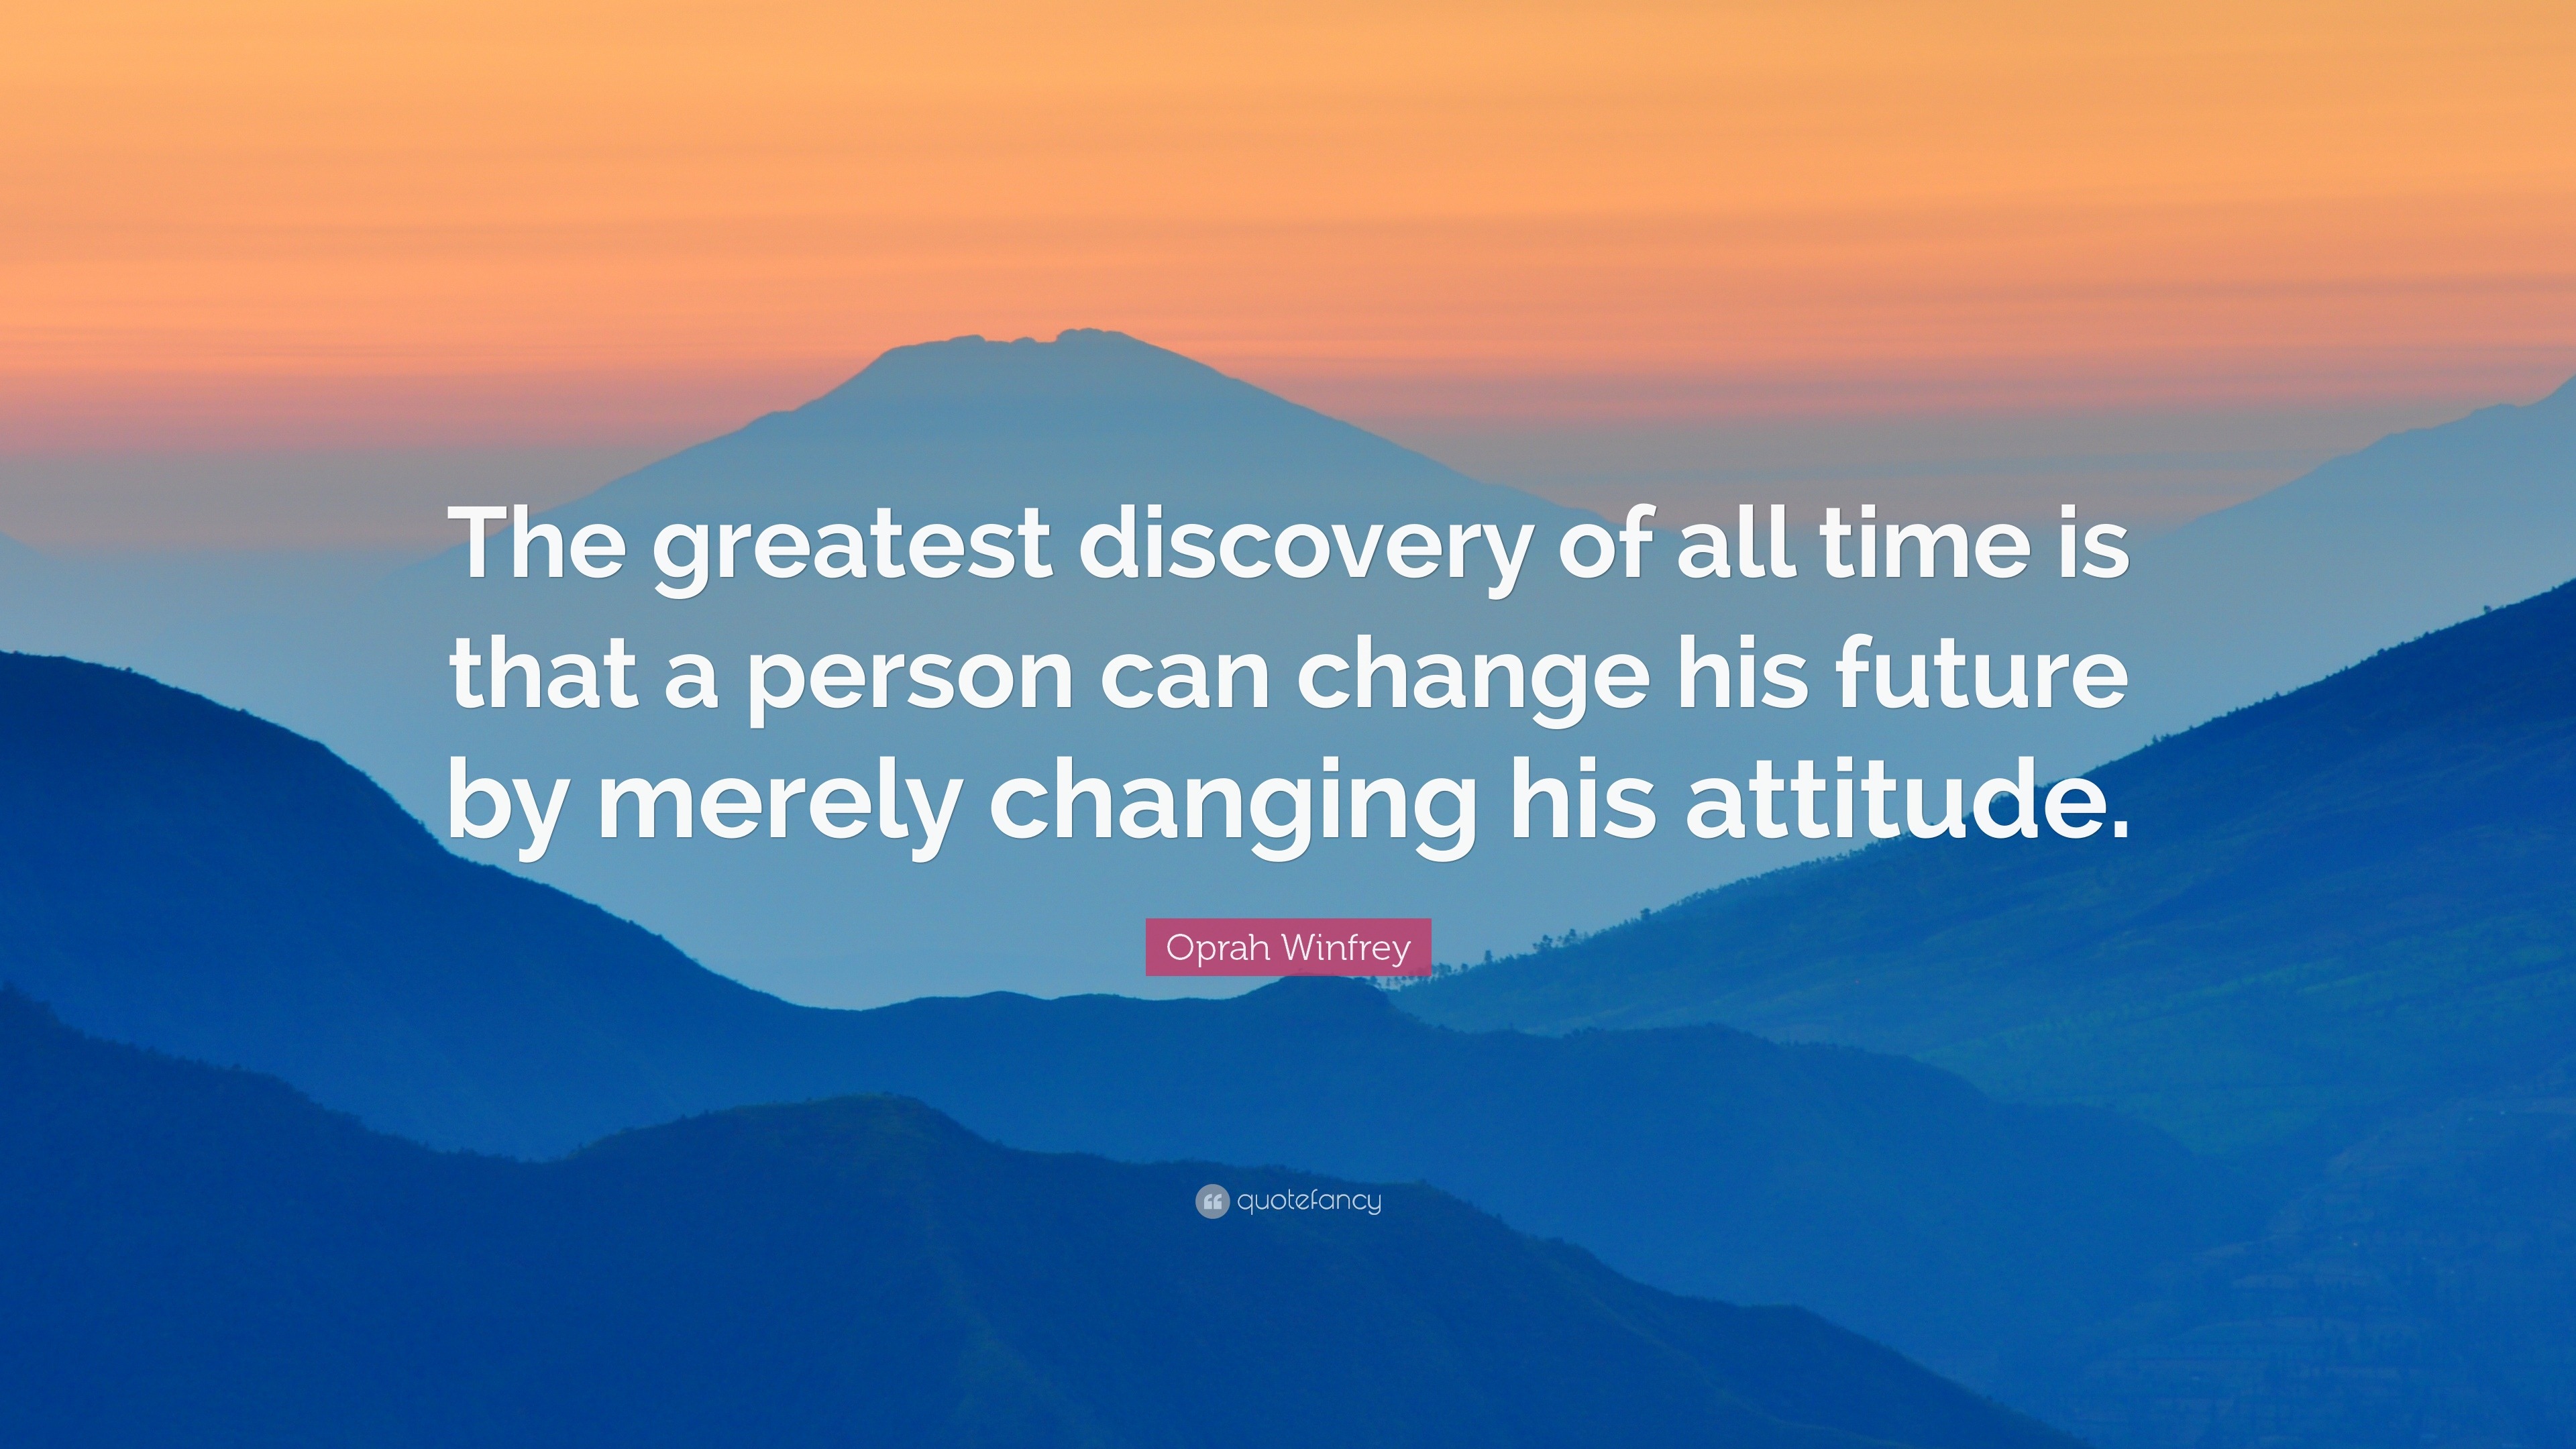 Oprah Winfrey Quote: “The greatest discovery of all time is that a